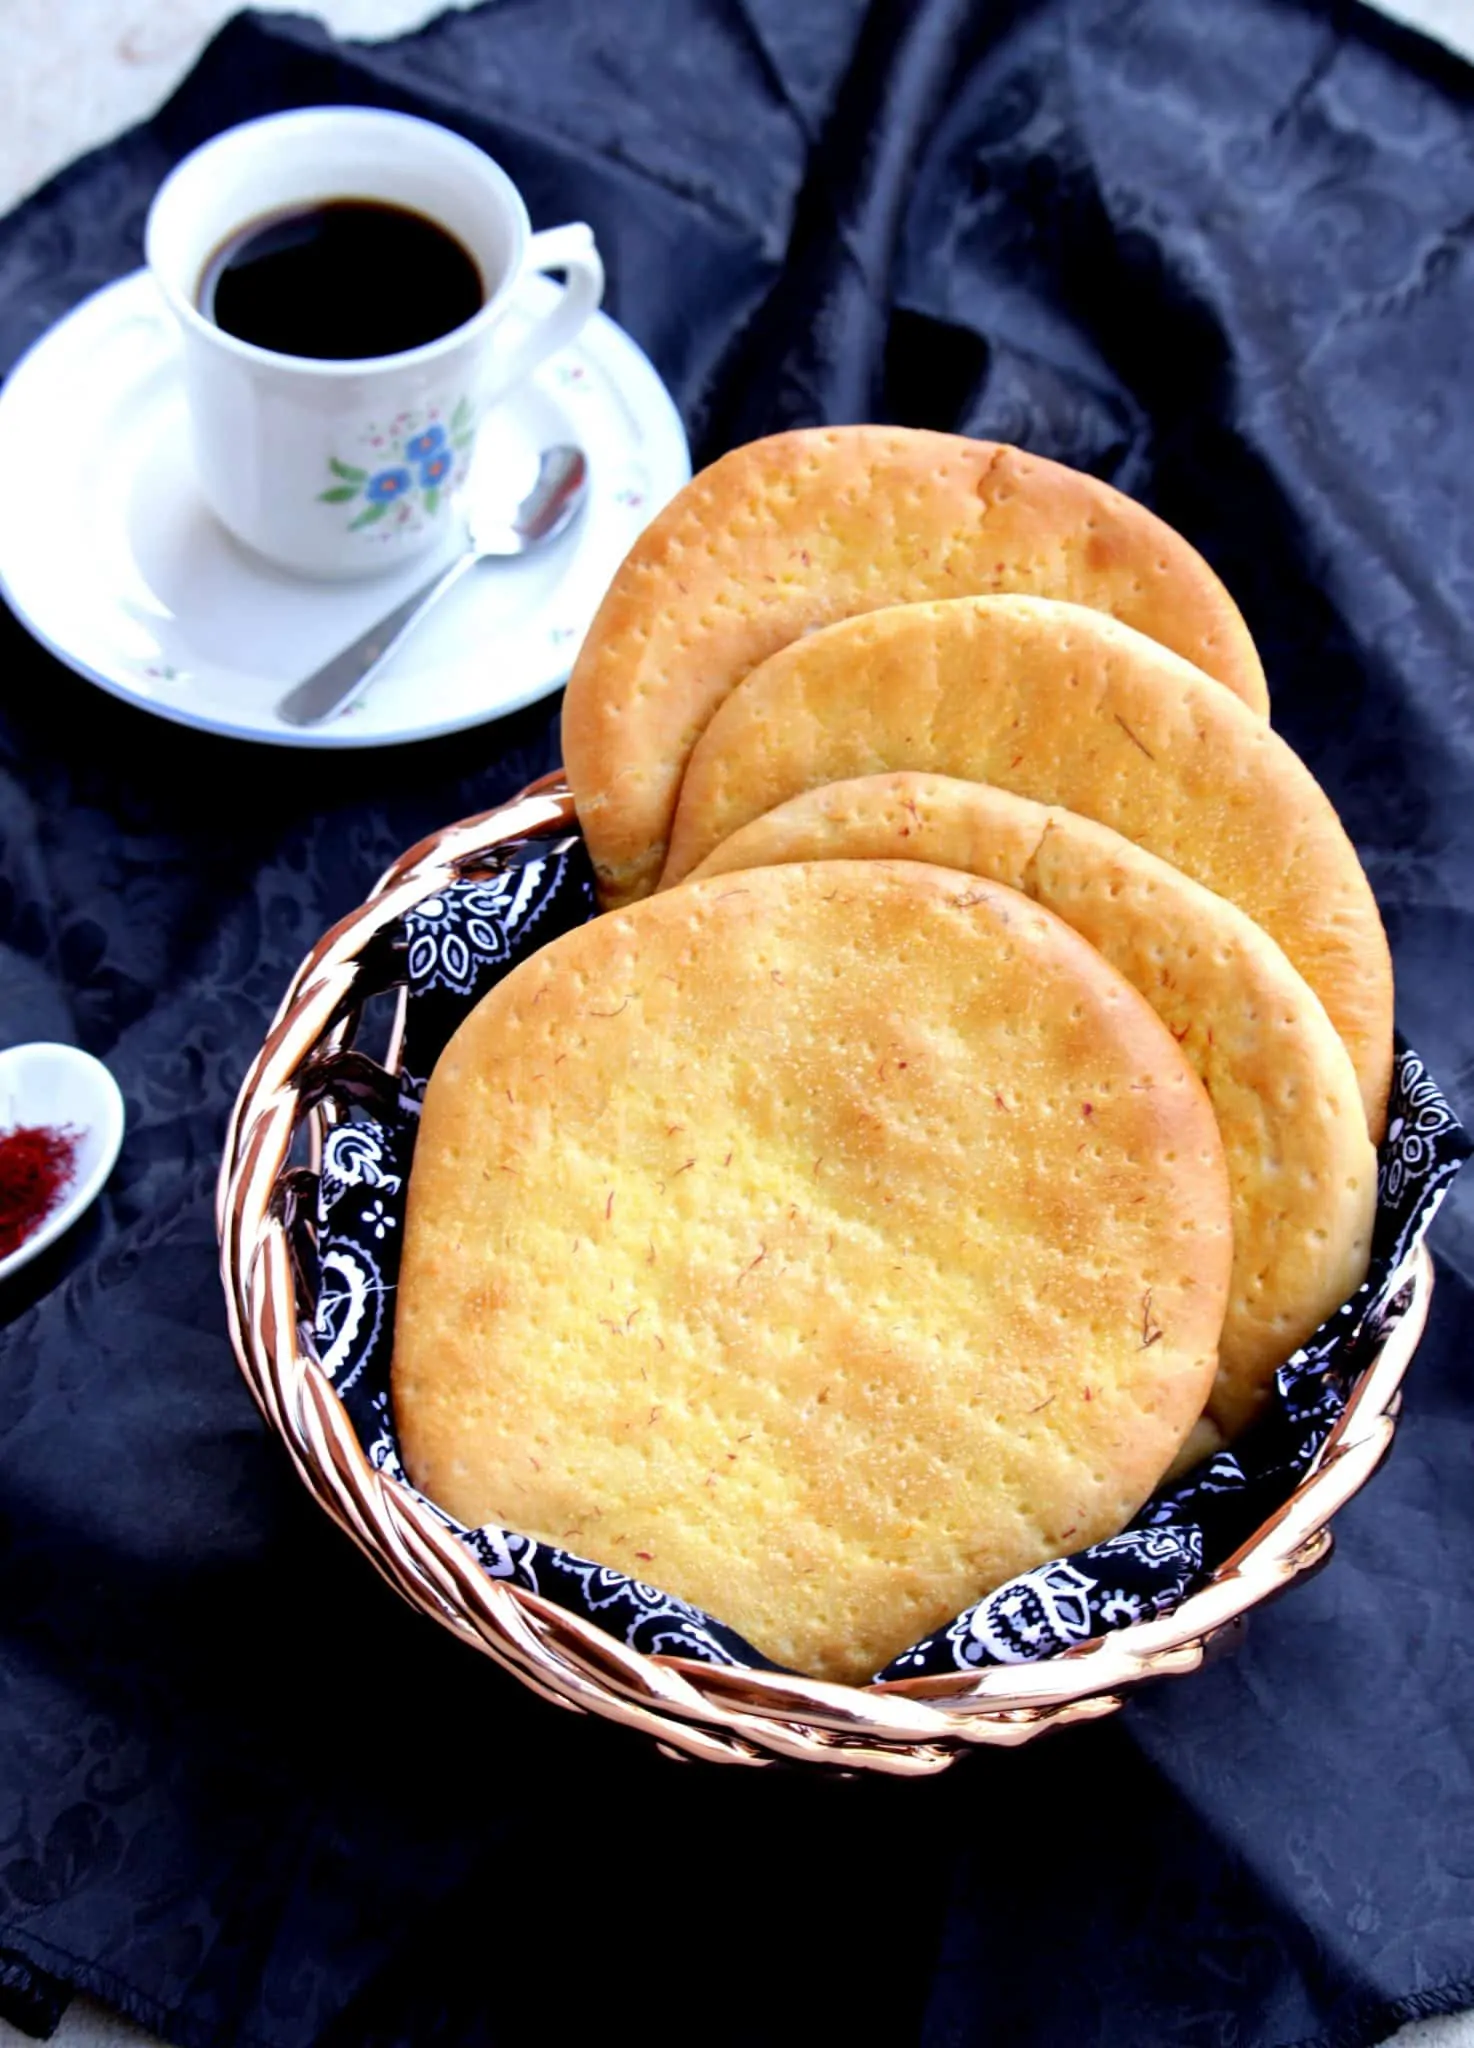 Sheermal / Shirmal - Saffron Flavored Flat Bread served in a plate with tea